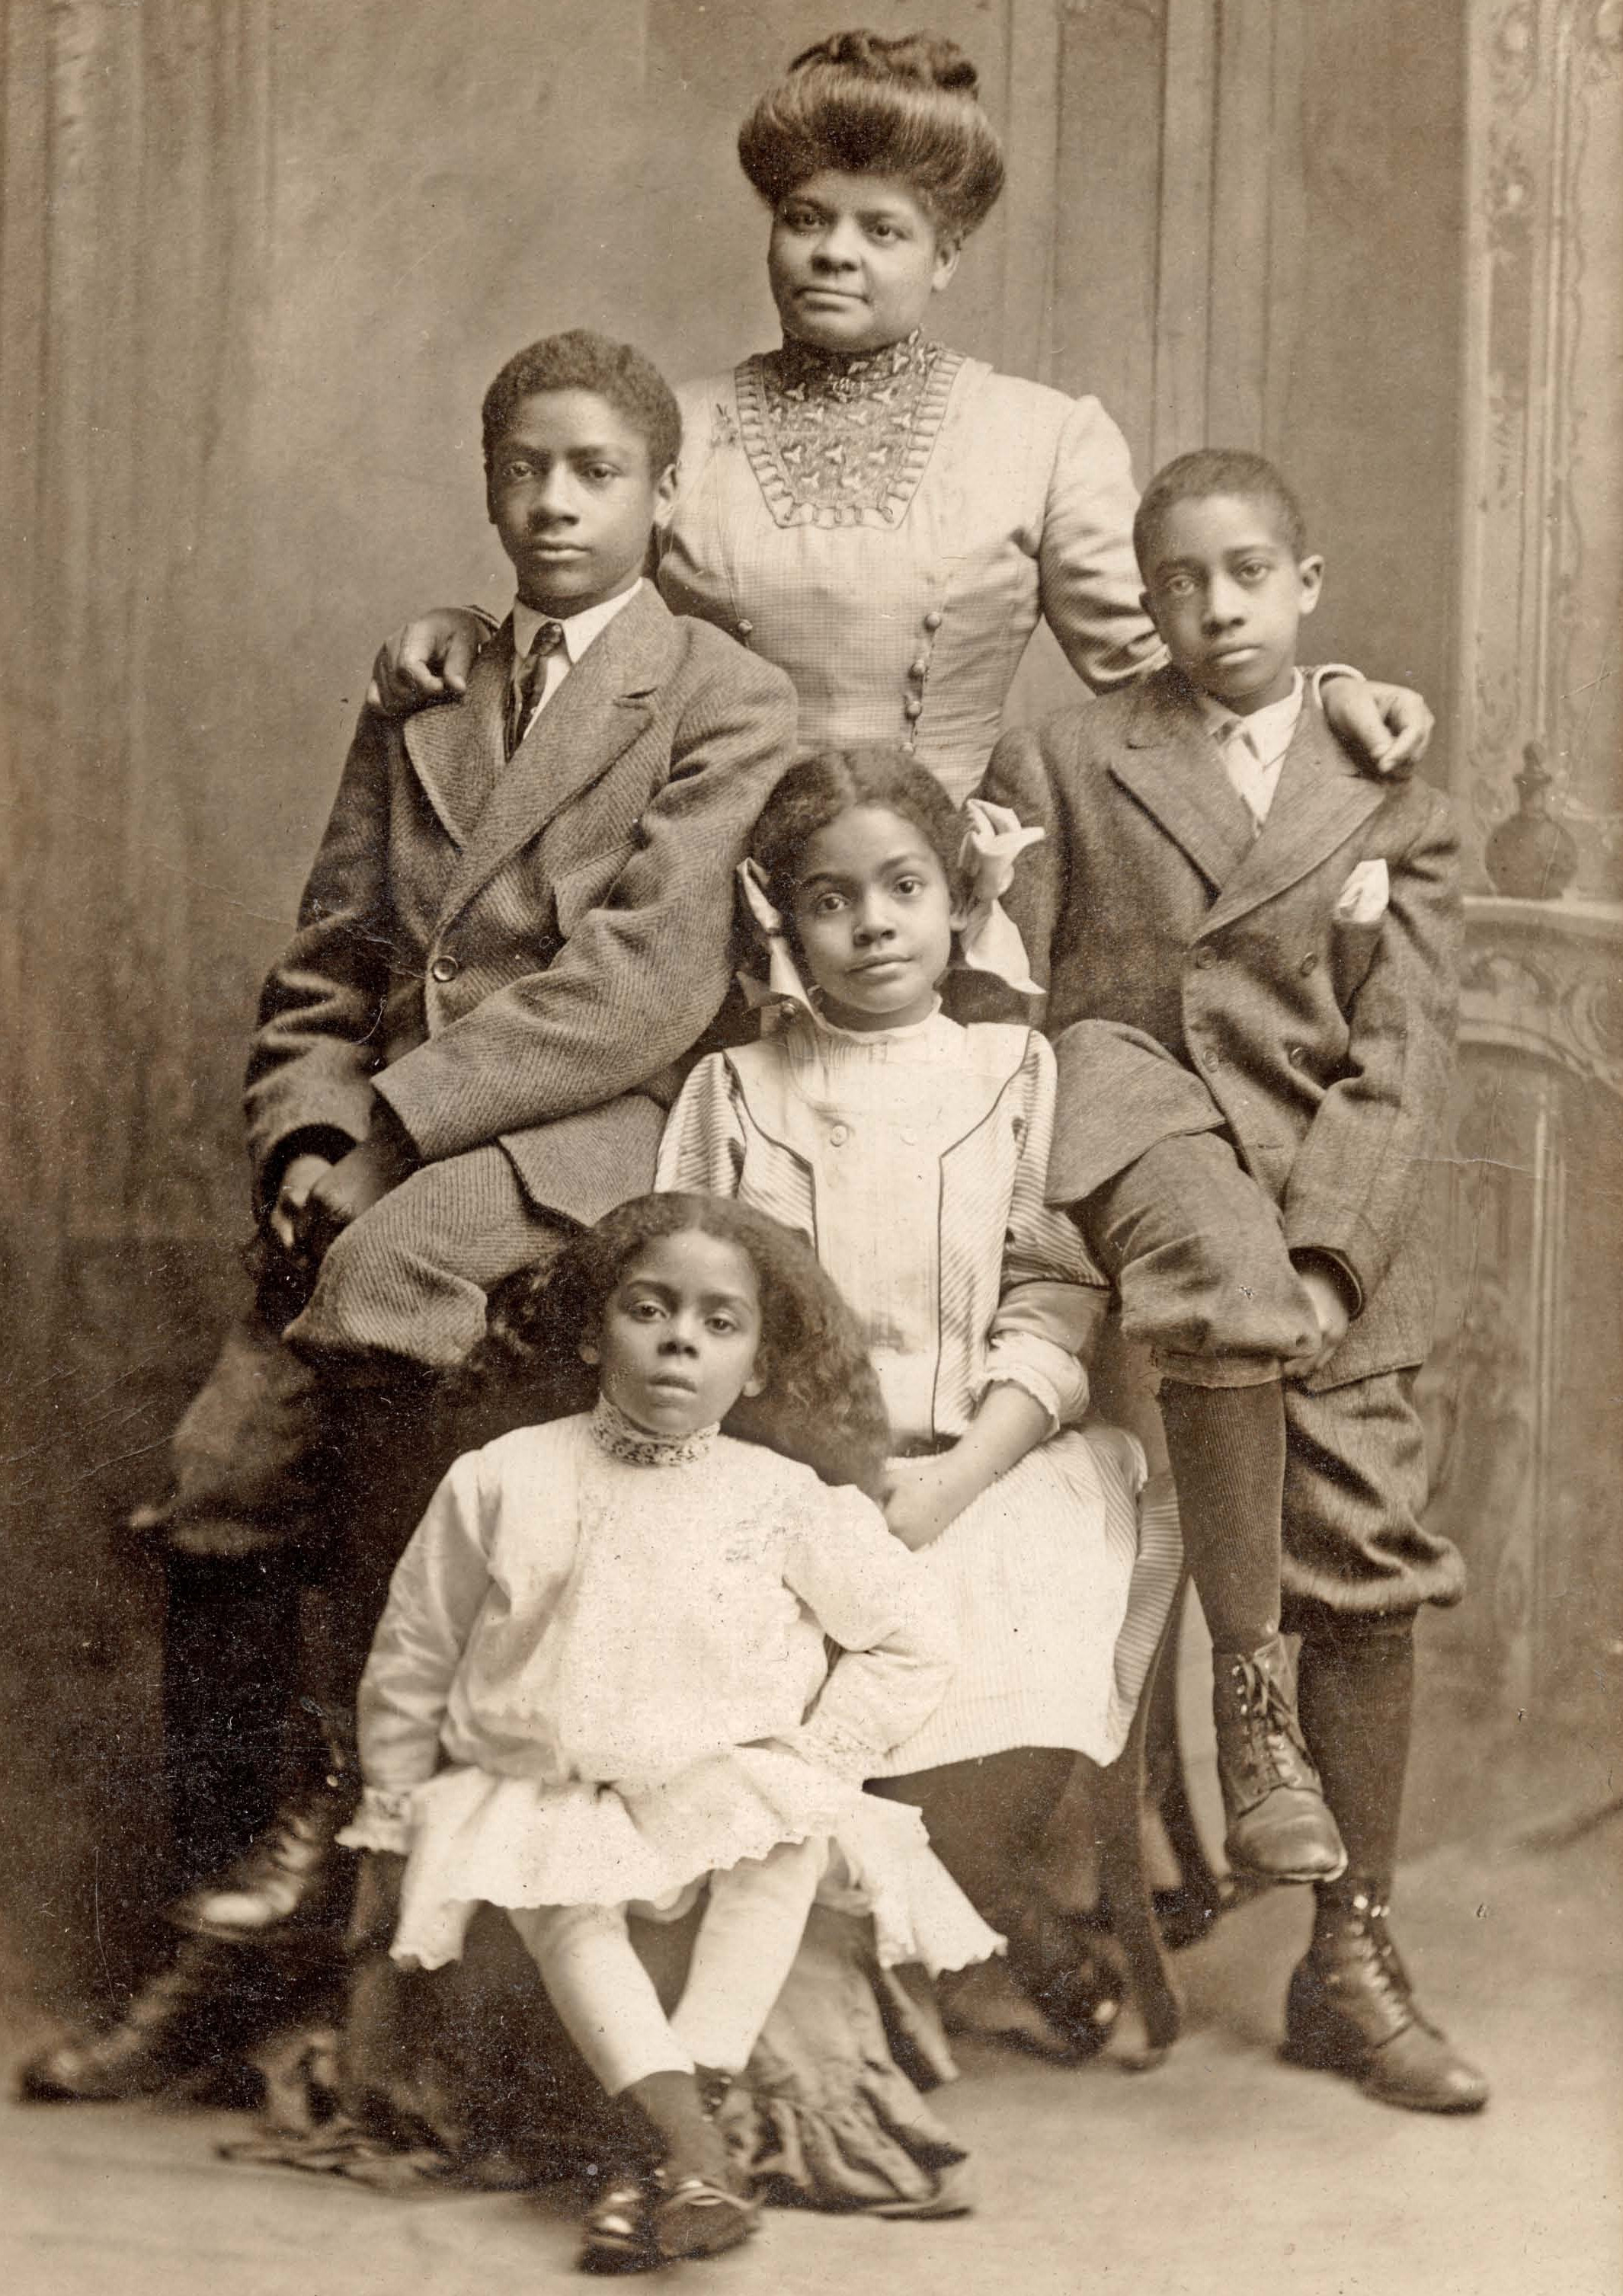 https://www.nps.gov/articles/000/images/Ida_B_Wells_with_her_children-_1909_-cropped.jpg